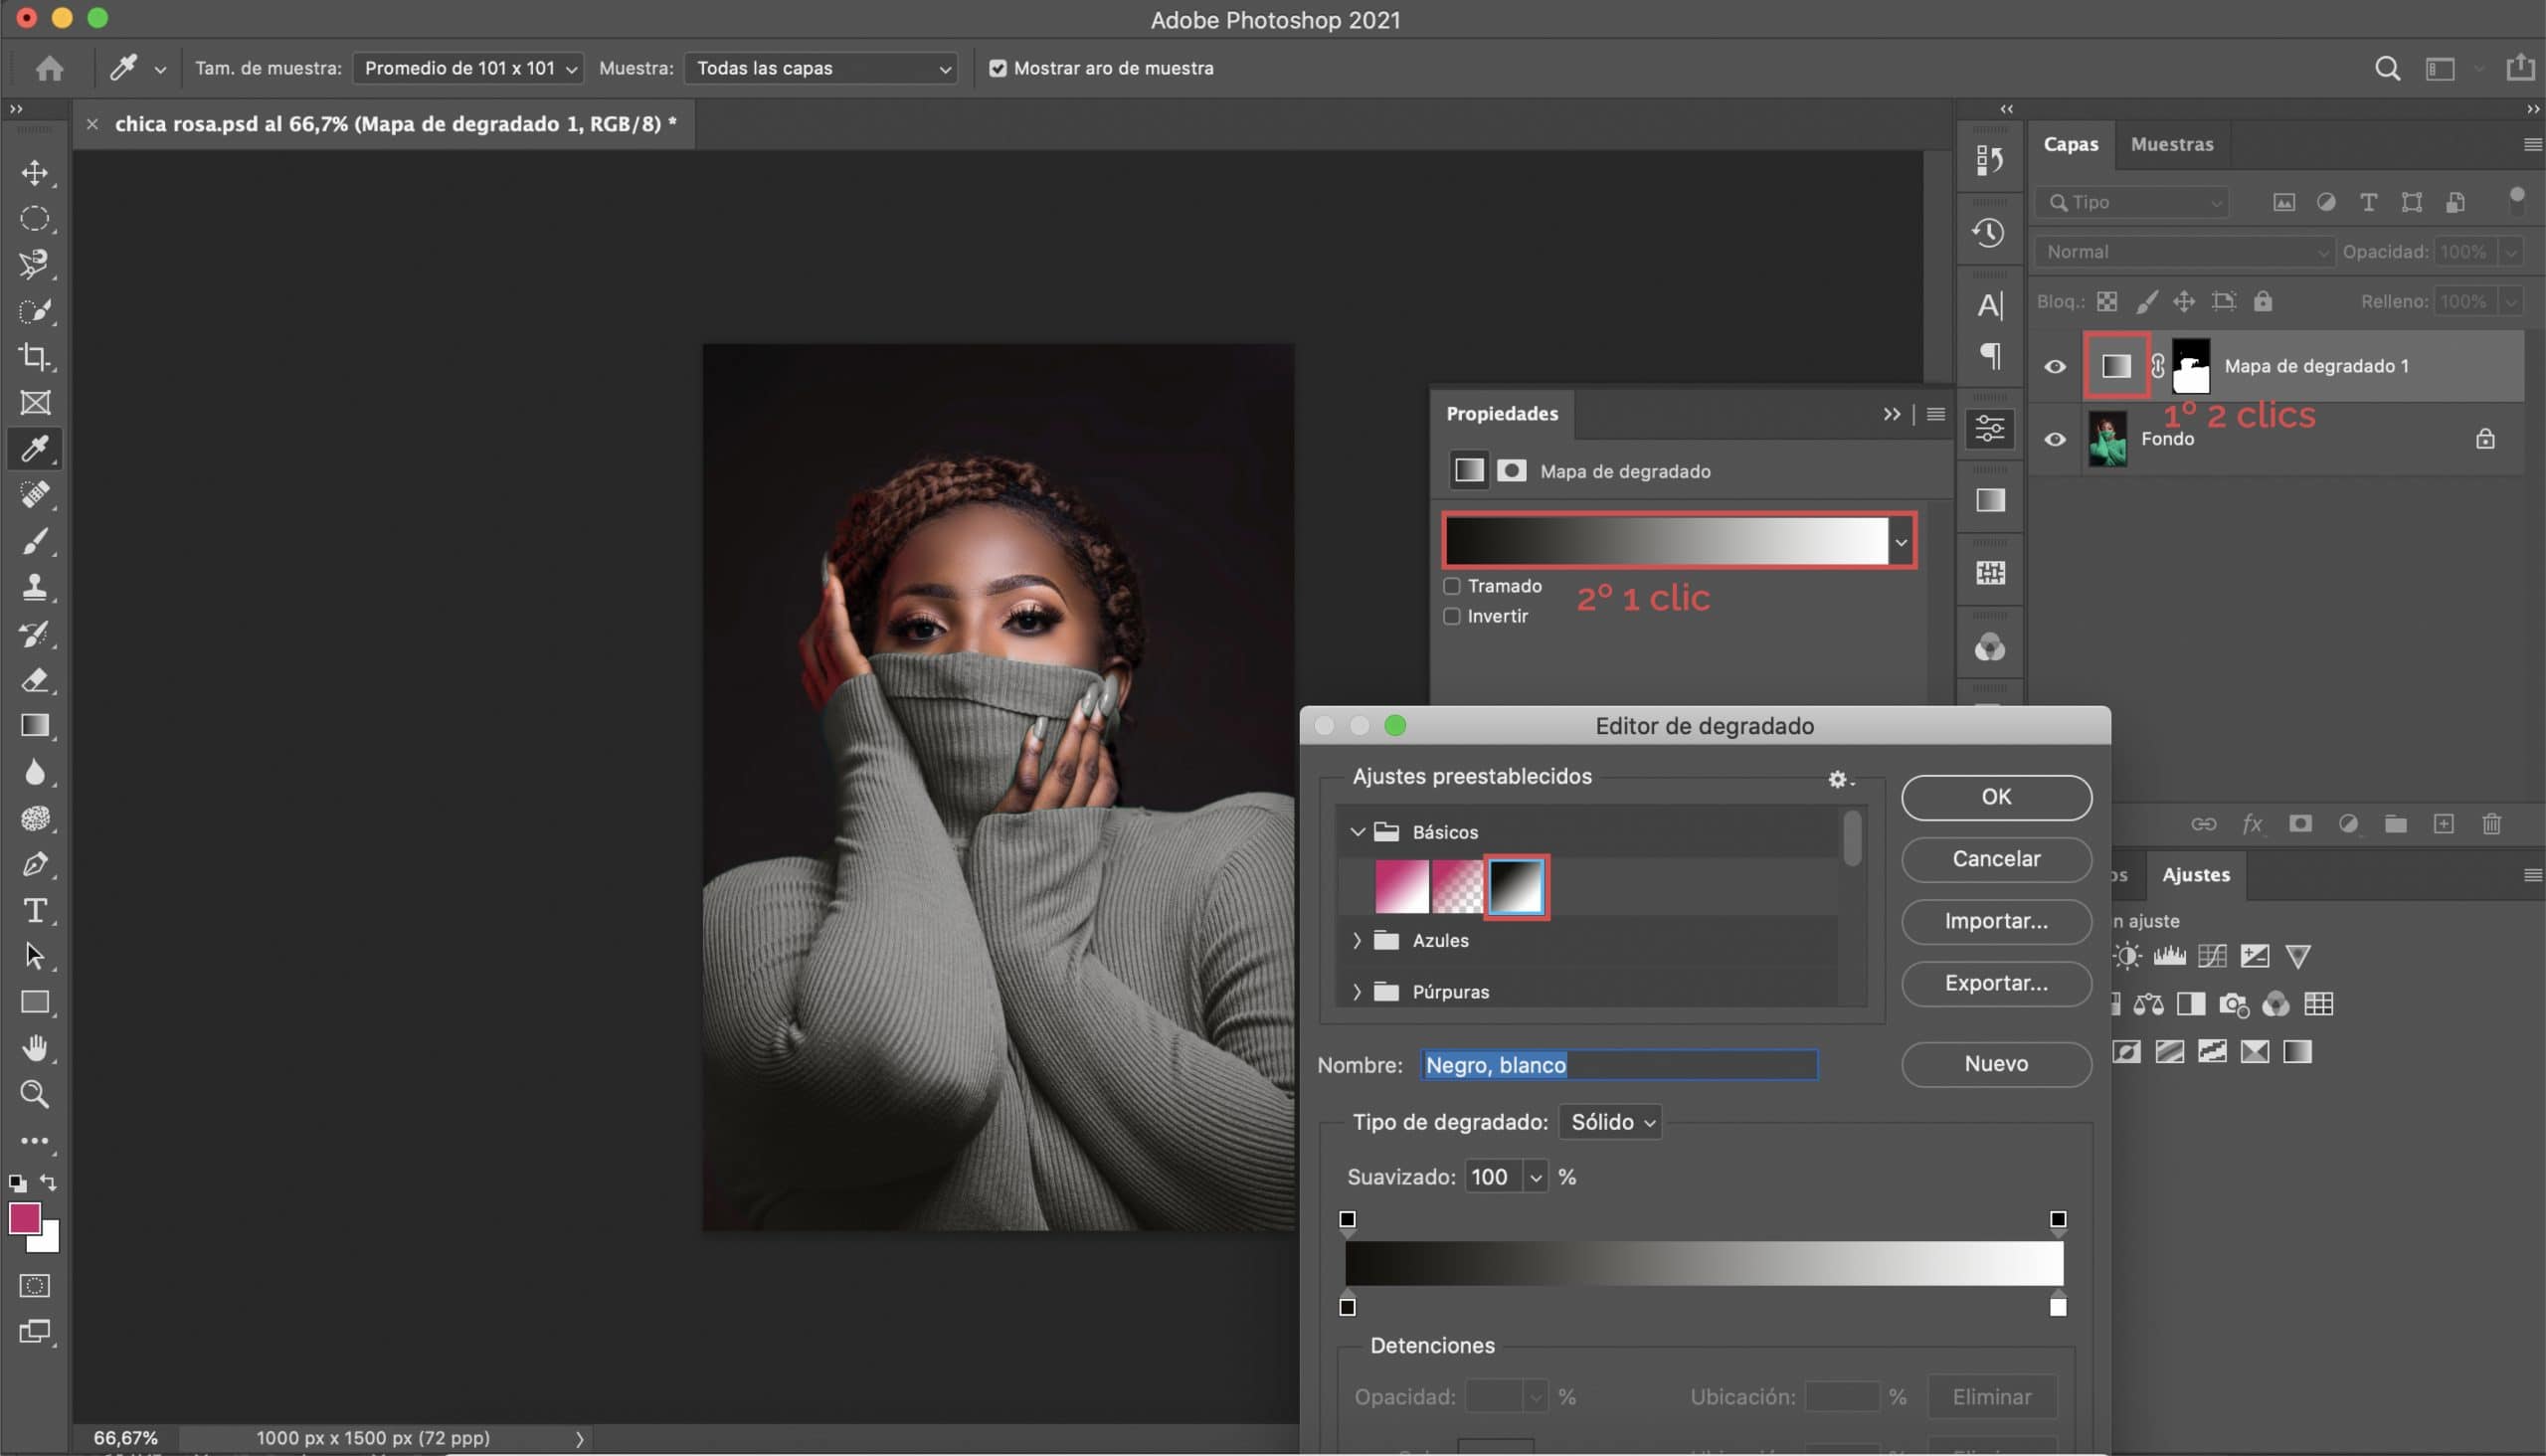 Apply basic black to white gradient to change color in Photoshop